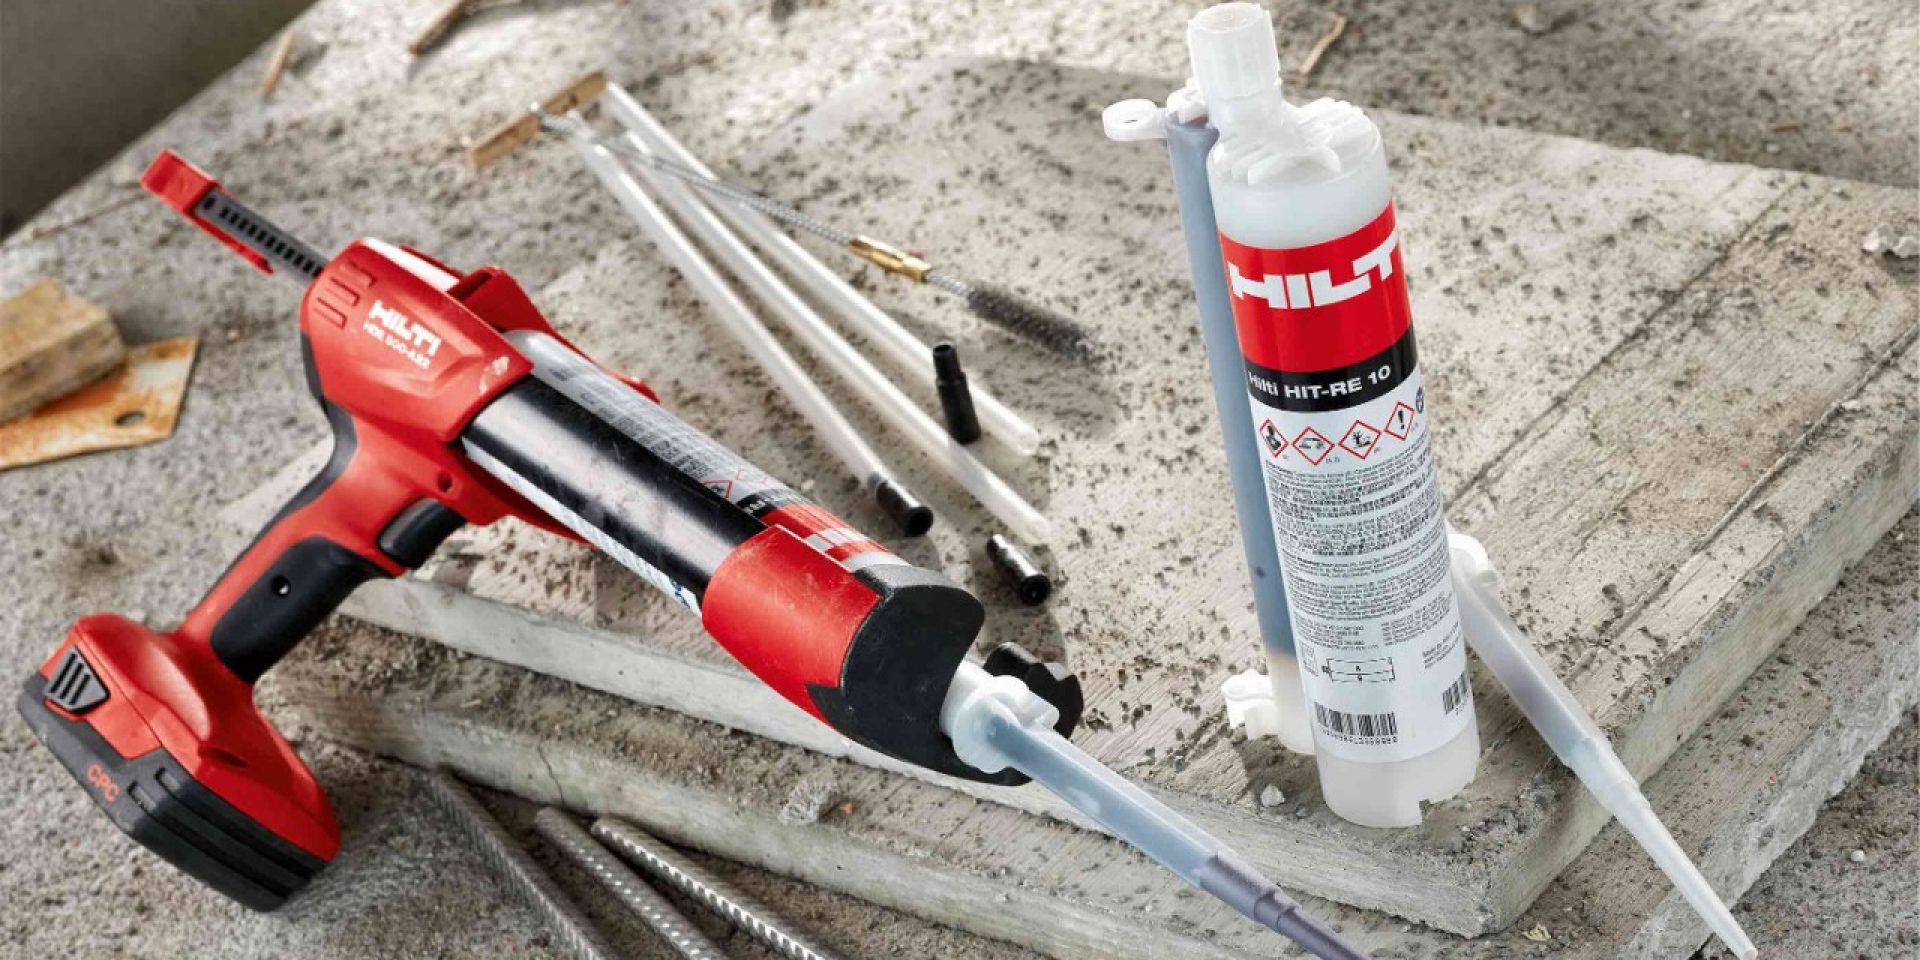 Hilti HIT-RE 10 580 ml injectable mortar system